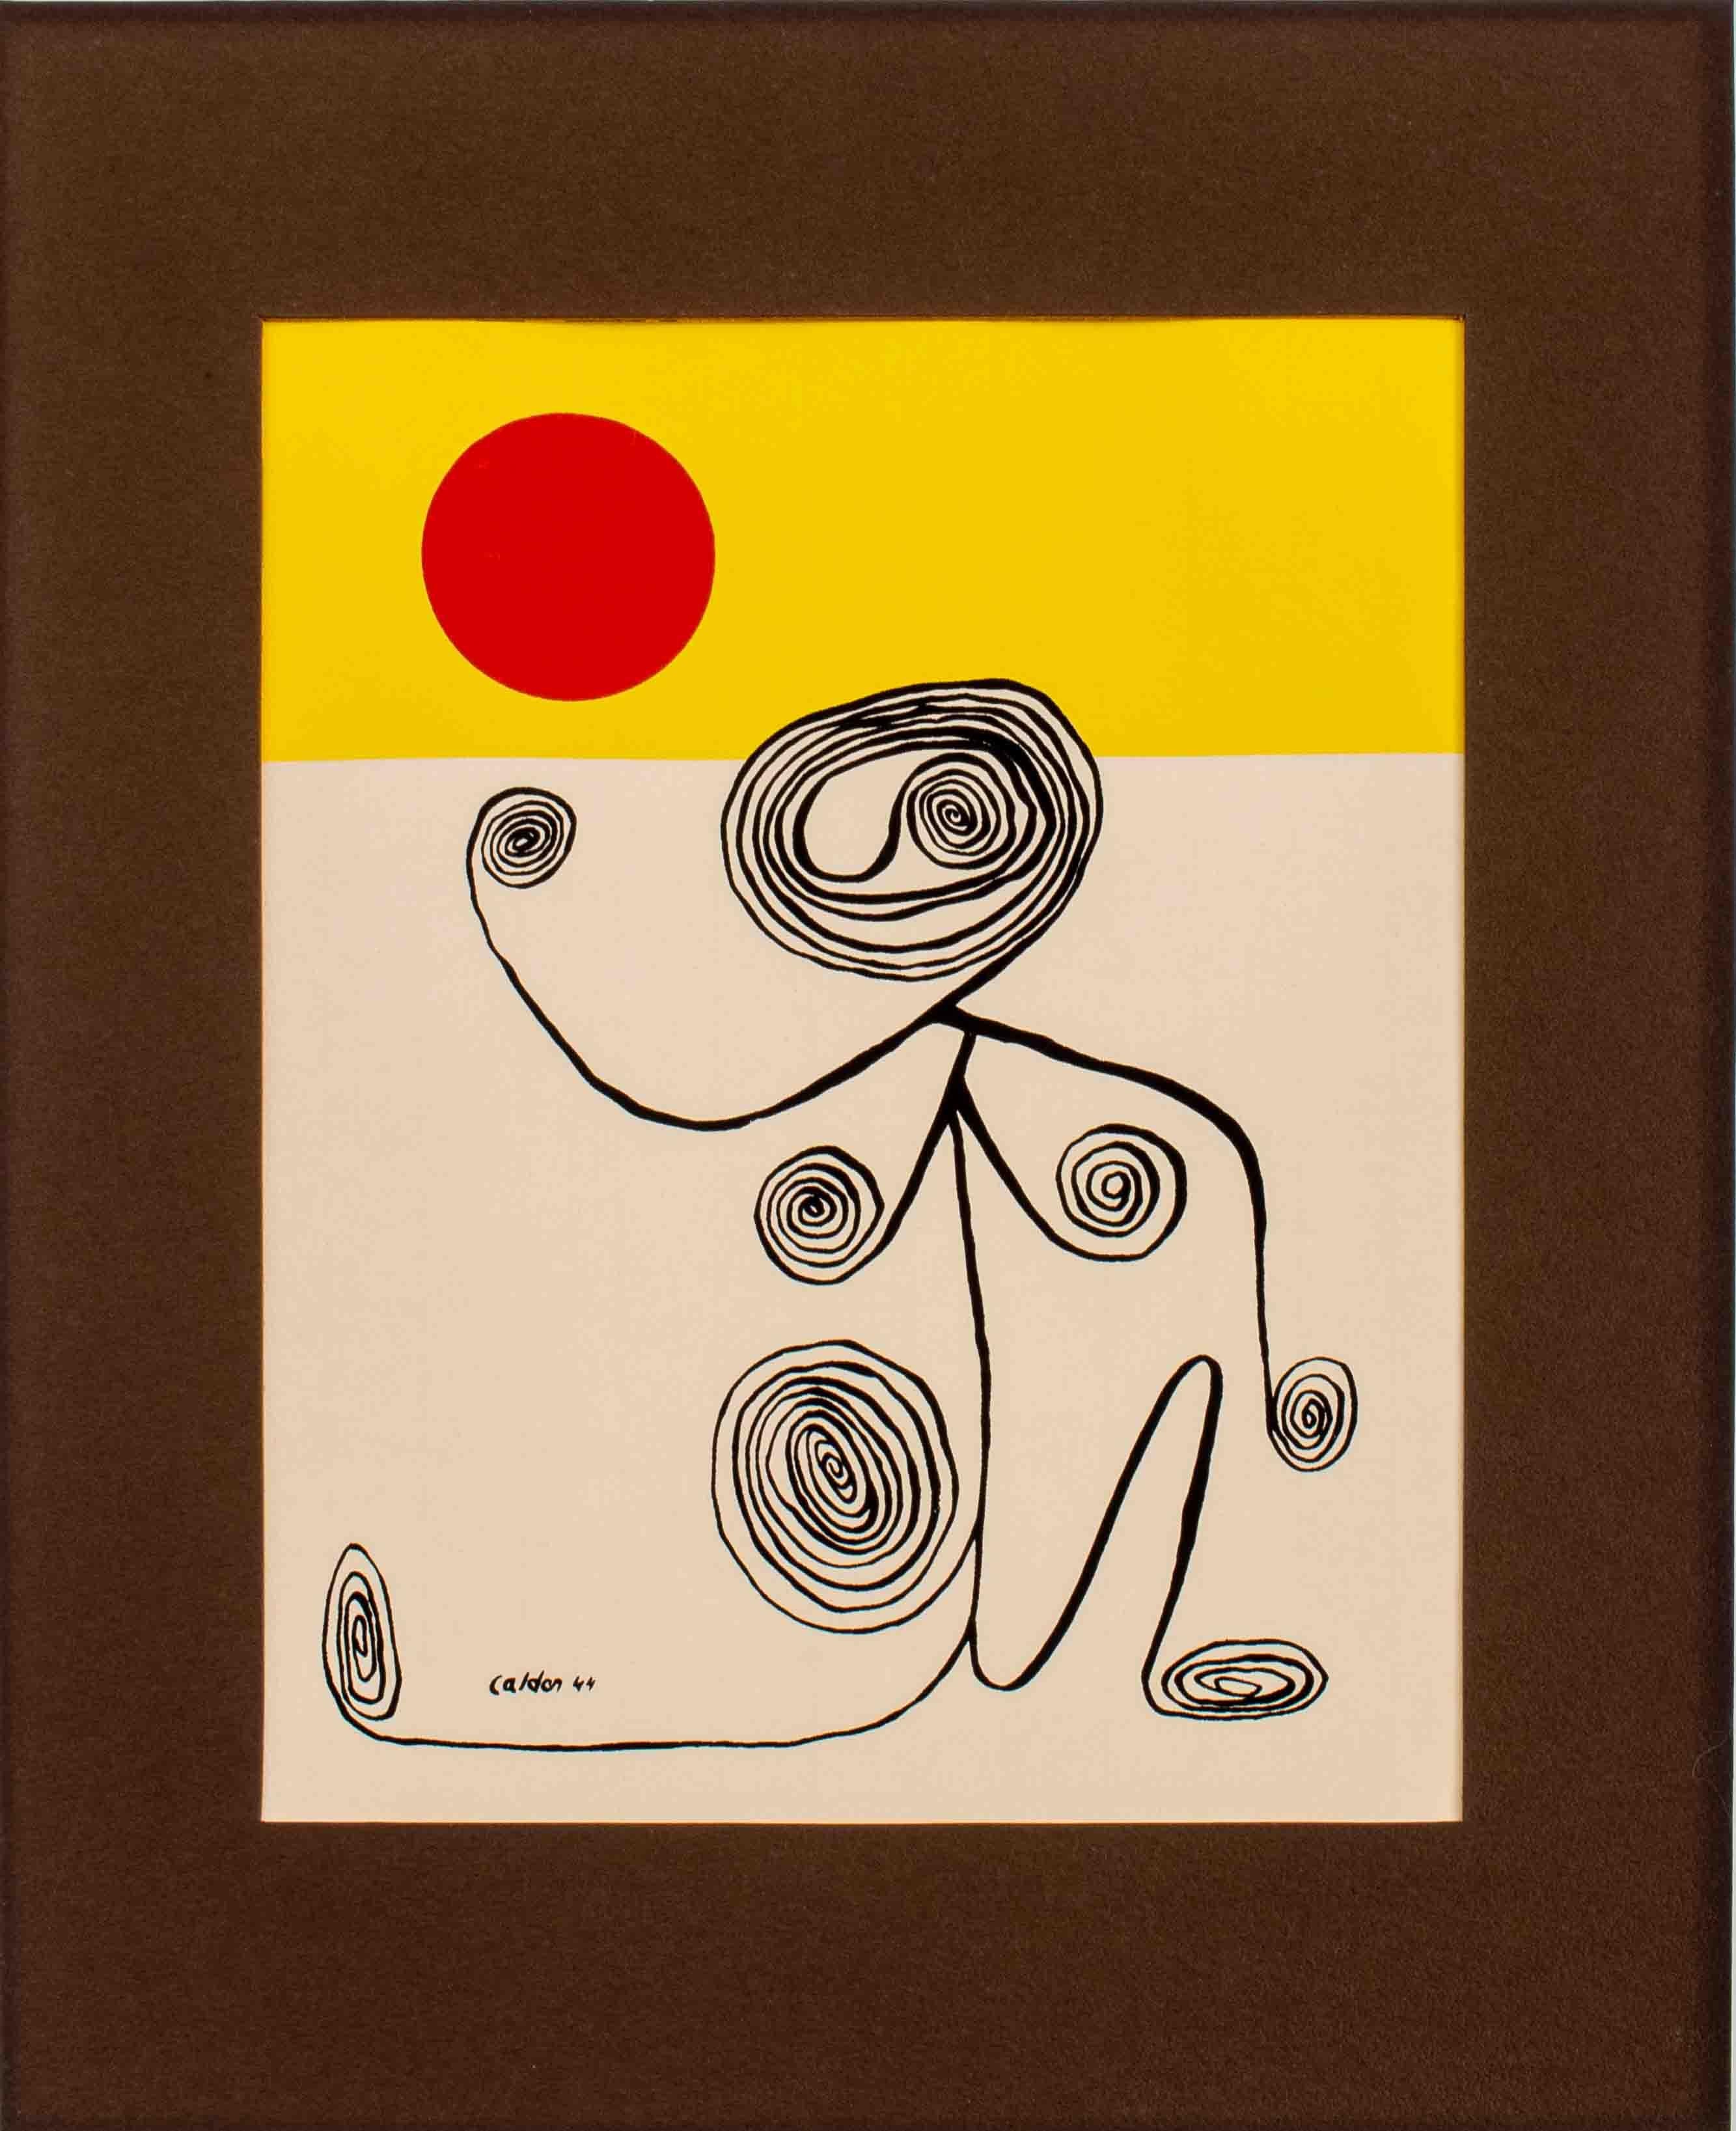 Alexander Calder (American, 1898 - 1976), Wire Figure, lithograph, 1944, signed in plate lower left, unframed.

Dimensions: Image: 13.75